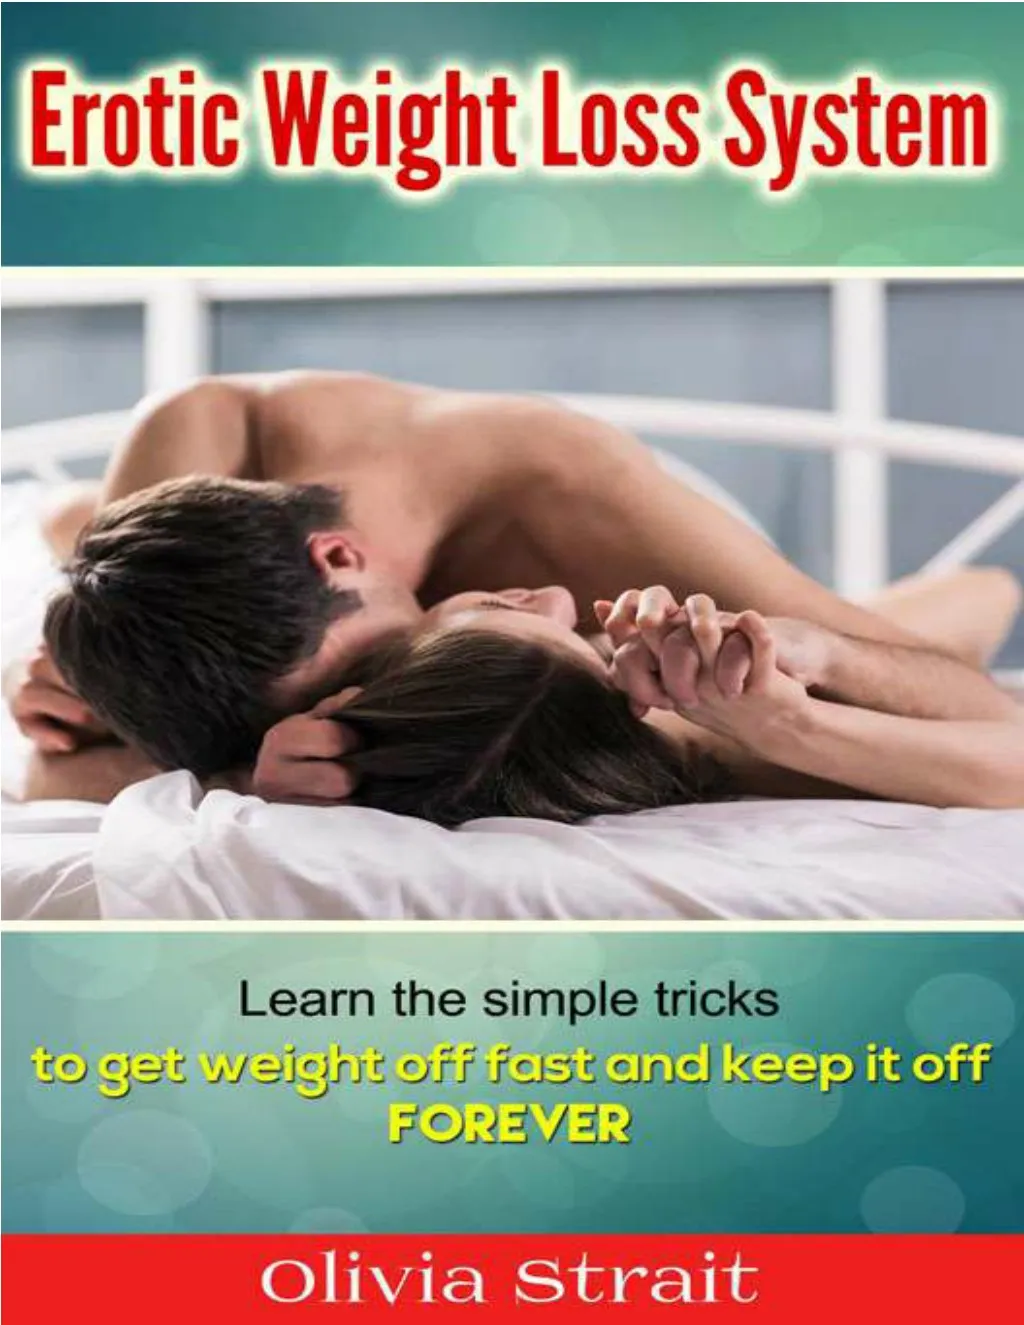 if you love reading erotic weight loss system